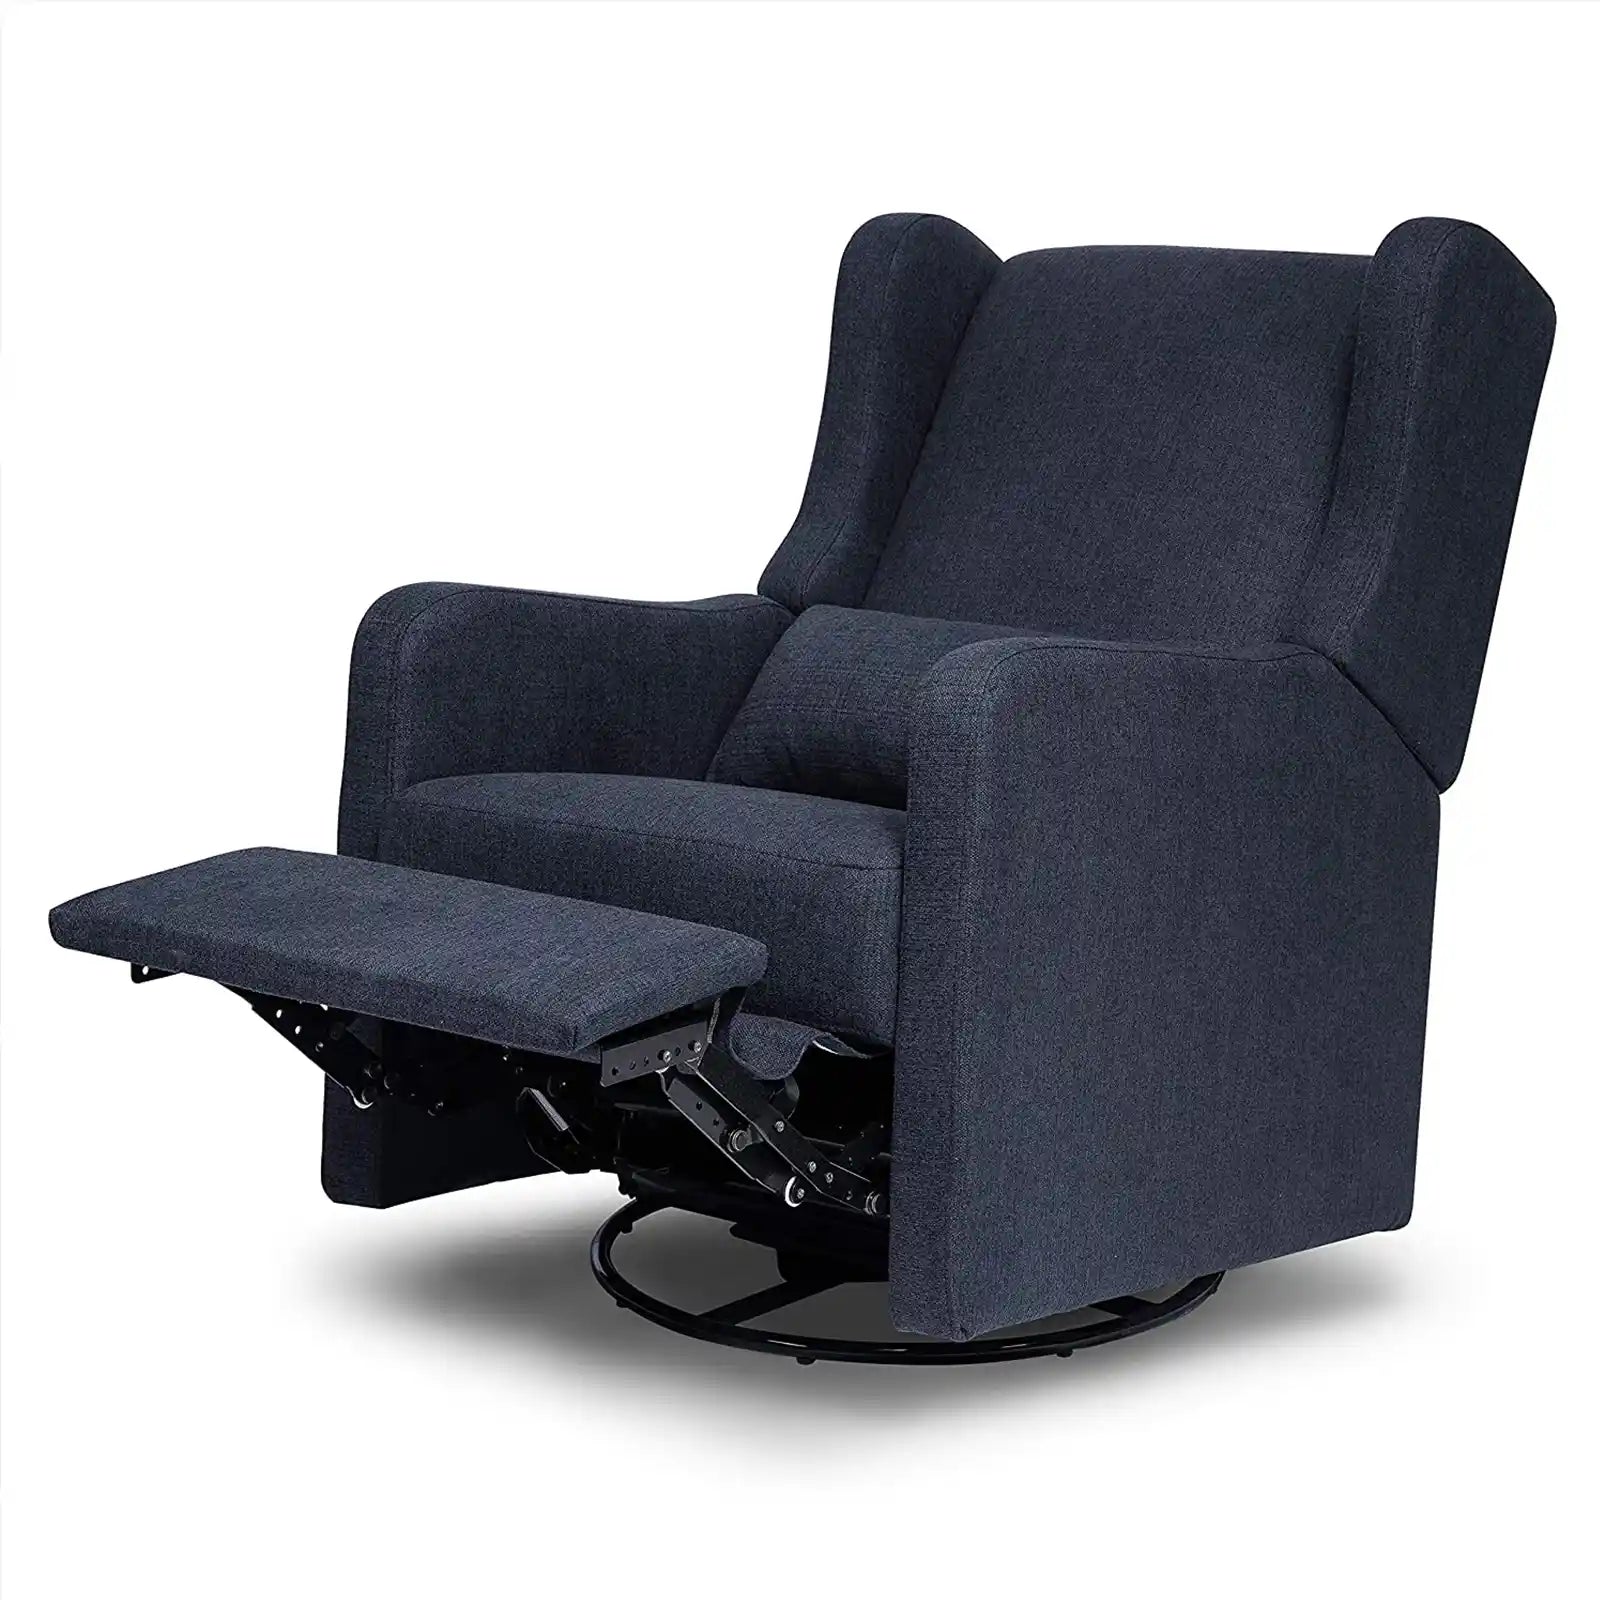 Recliner and Swivel Glider Sofa  in Performance Charcoal Linen